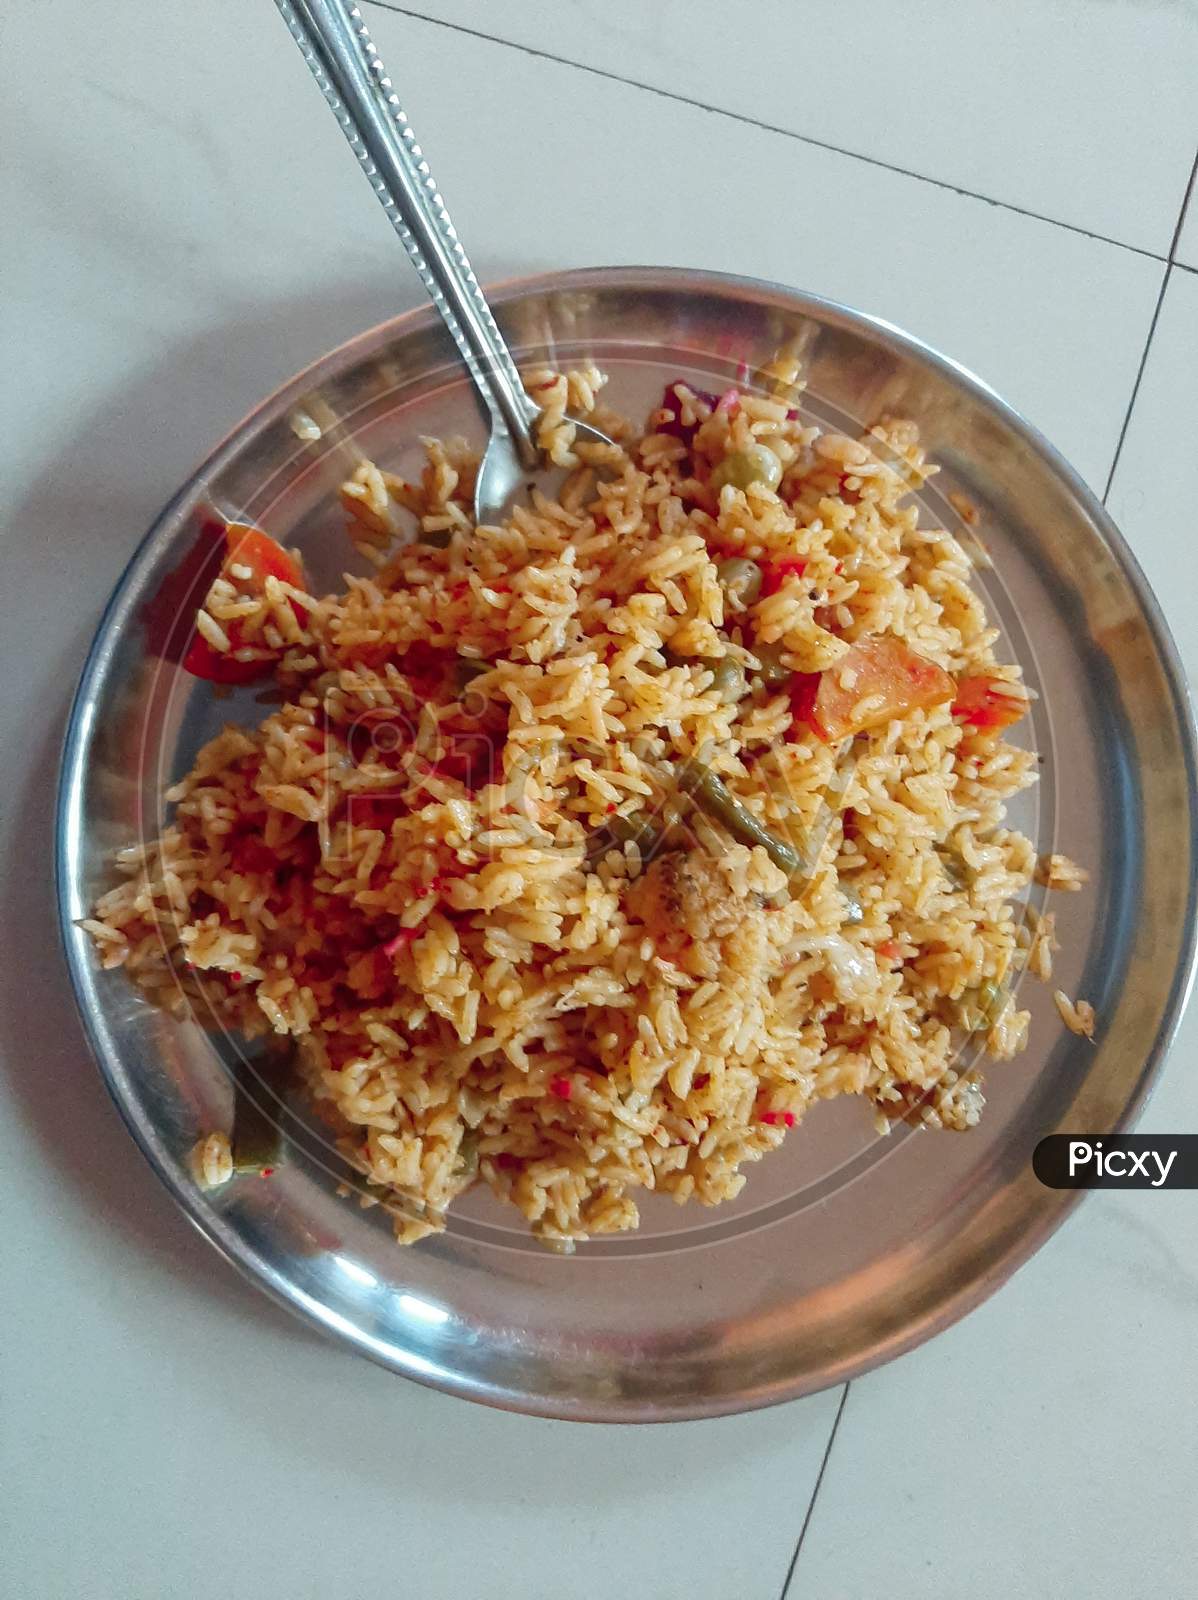 Biryani Is A Mixed Rice Dish With Its Origins Among The Muslims Of The Indian Subcontinent.